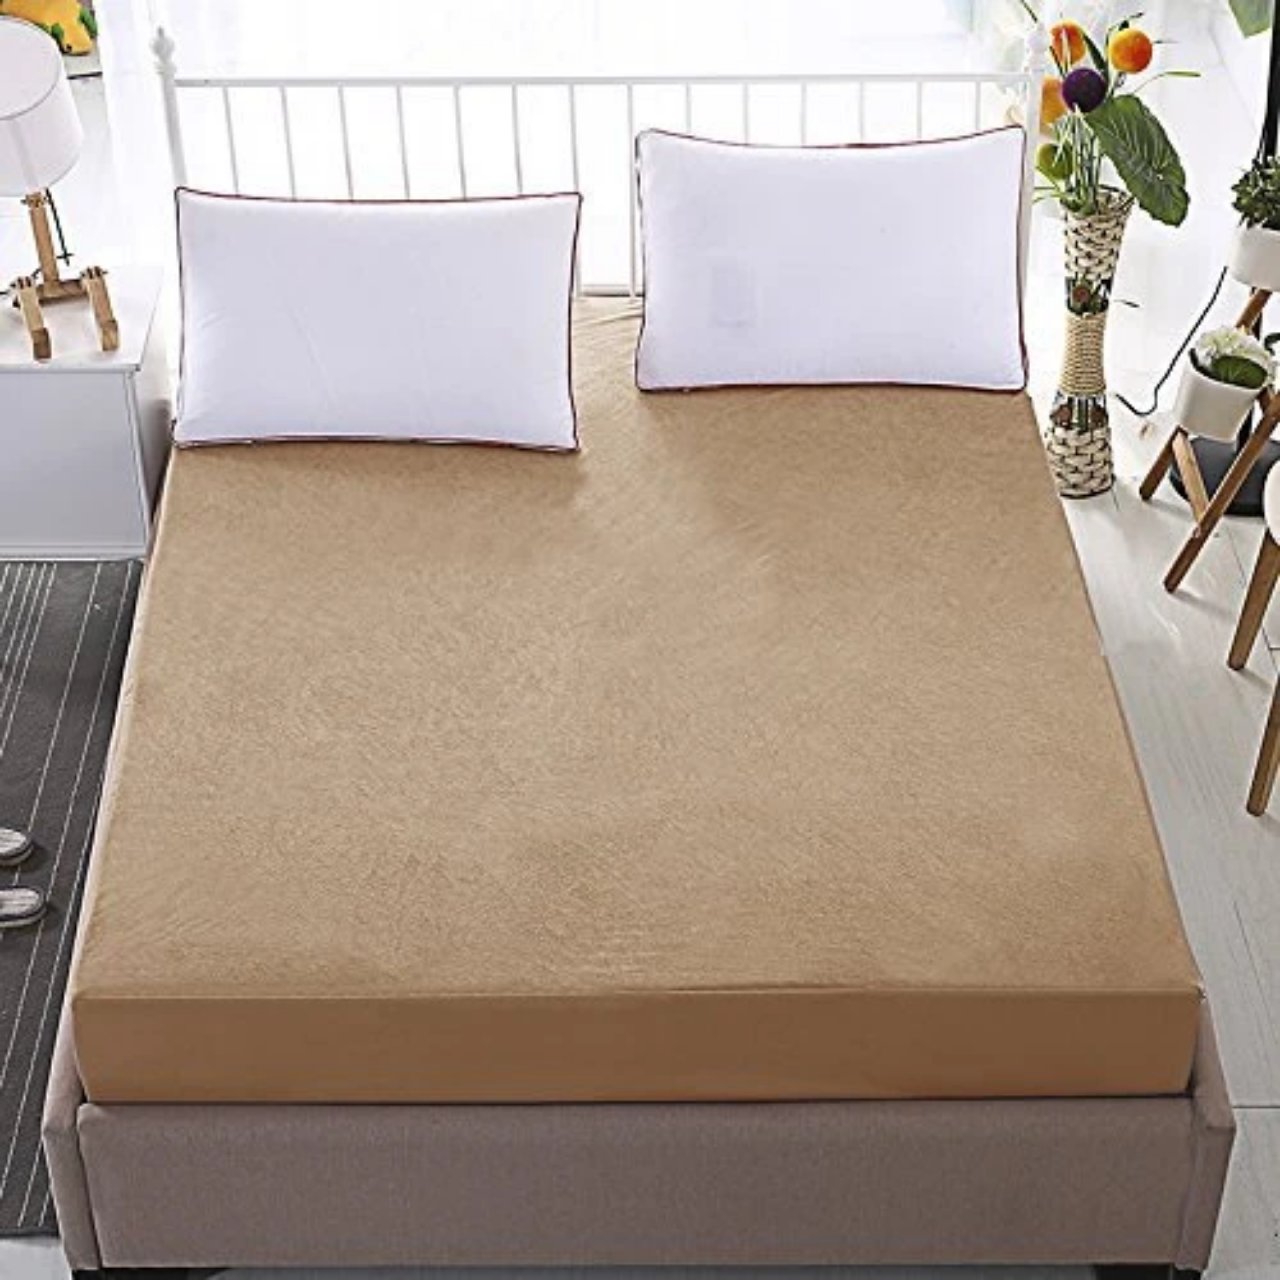 King Size Waterproof Mattress Cover Cotton Fitted Sheet Protector Bedsheet